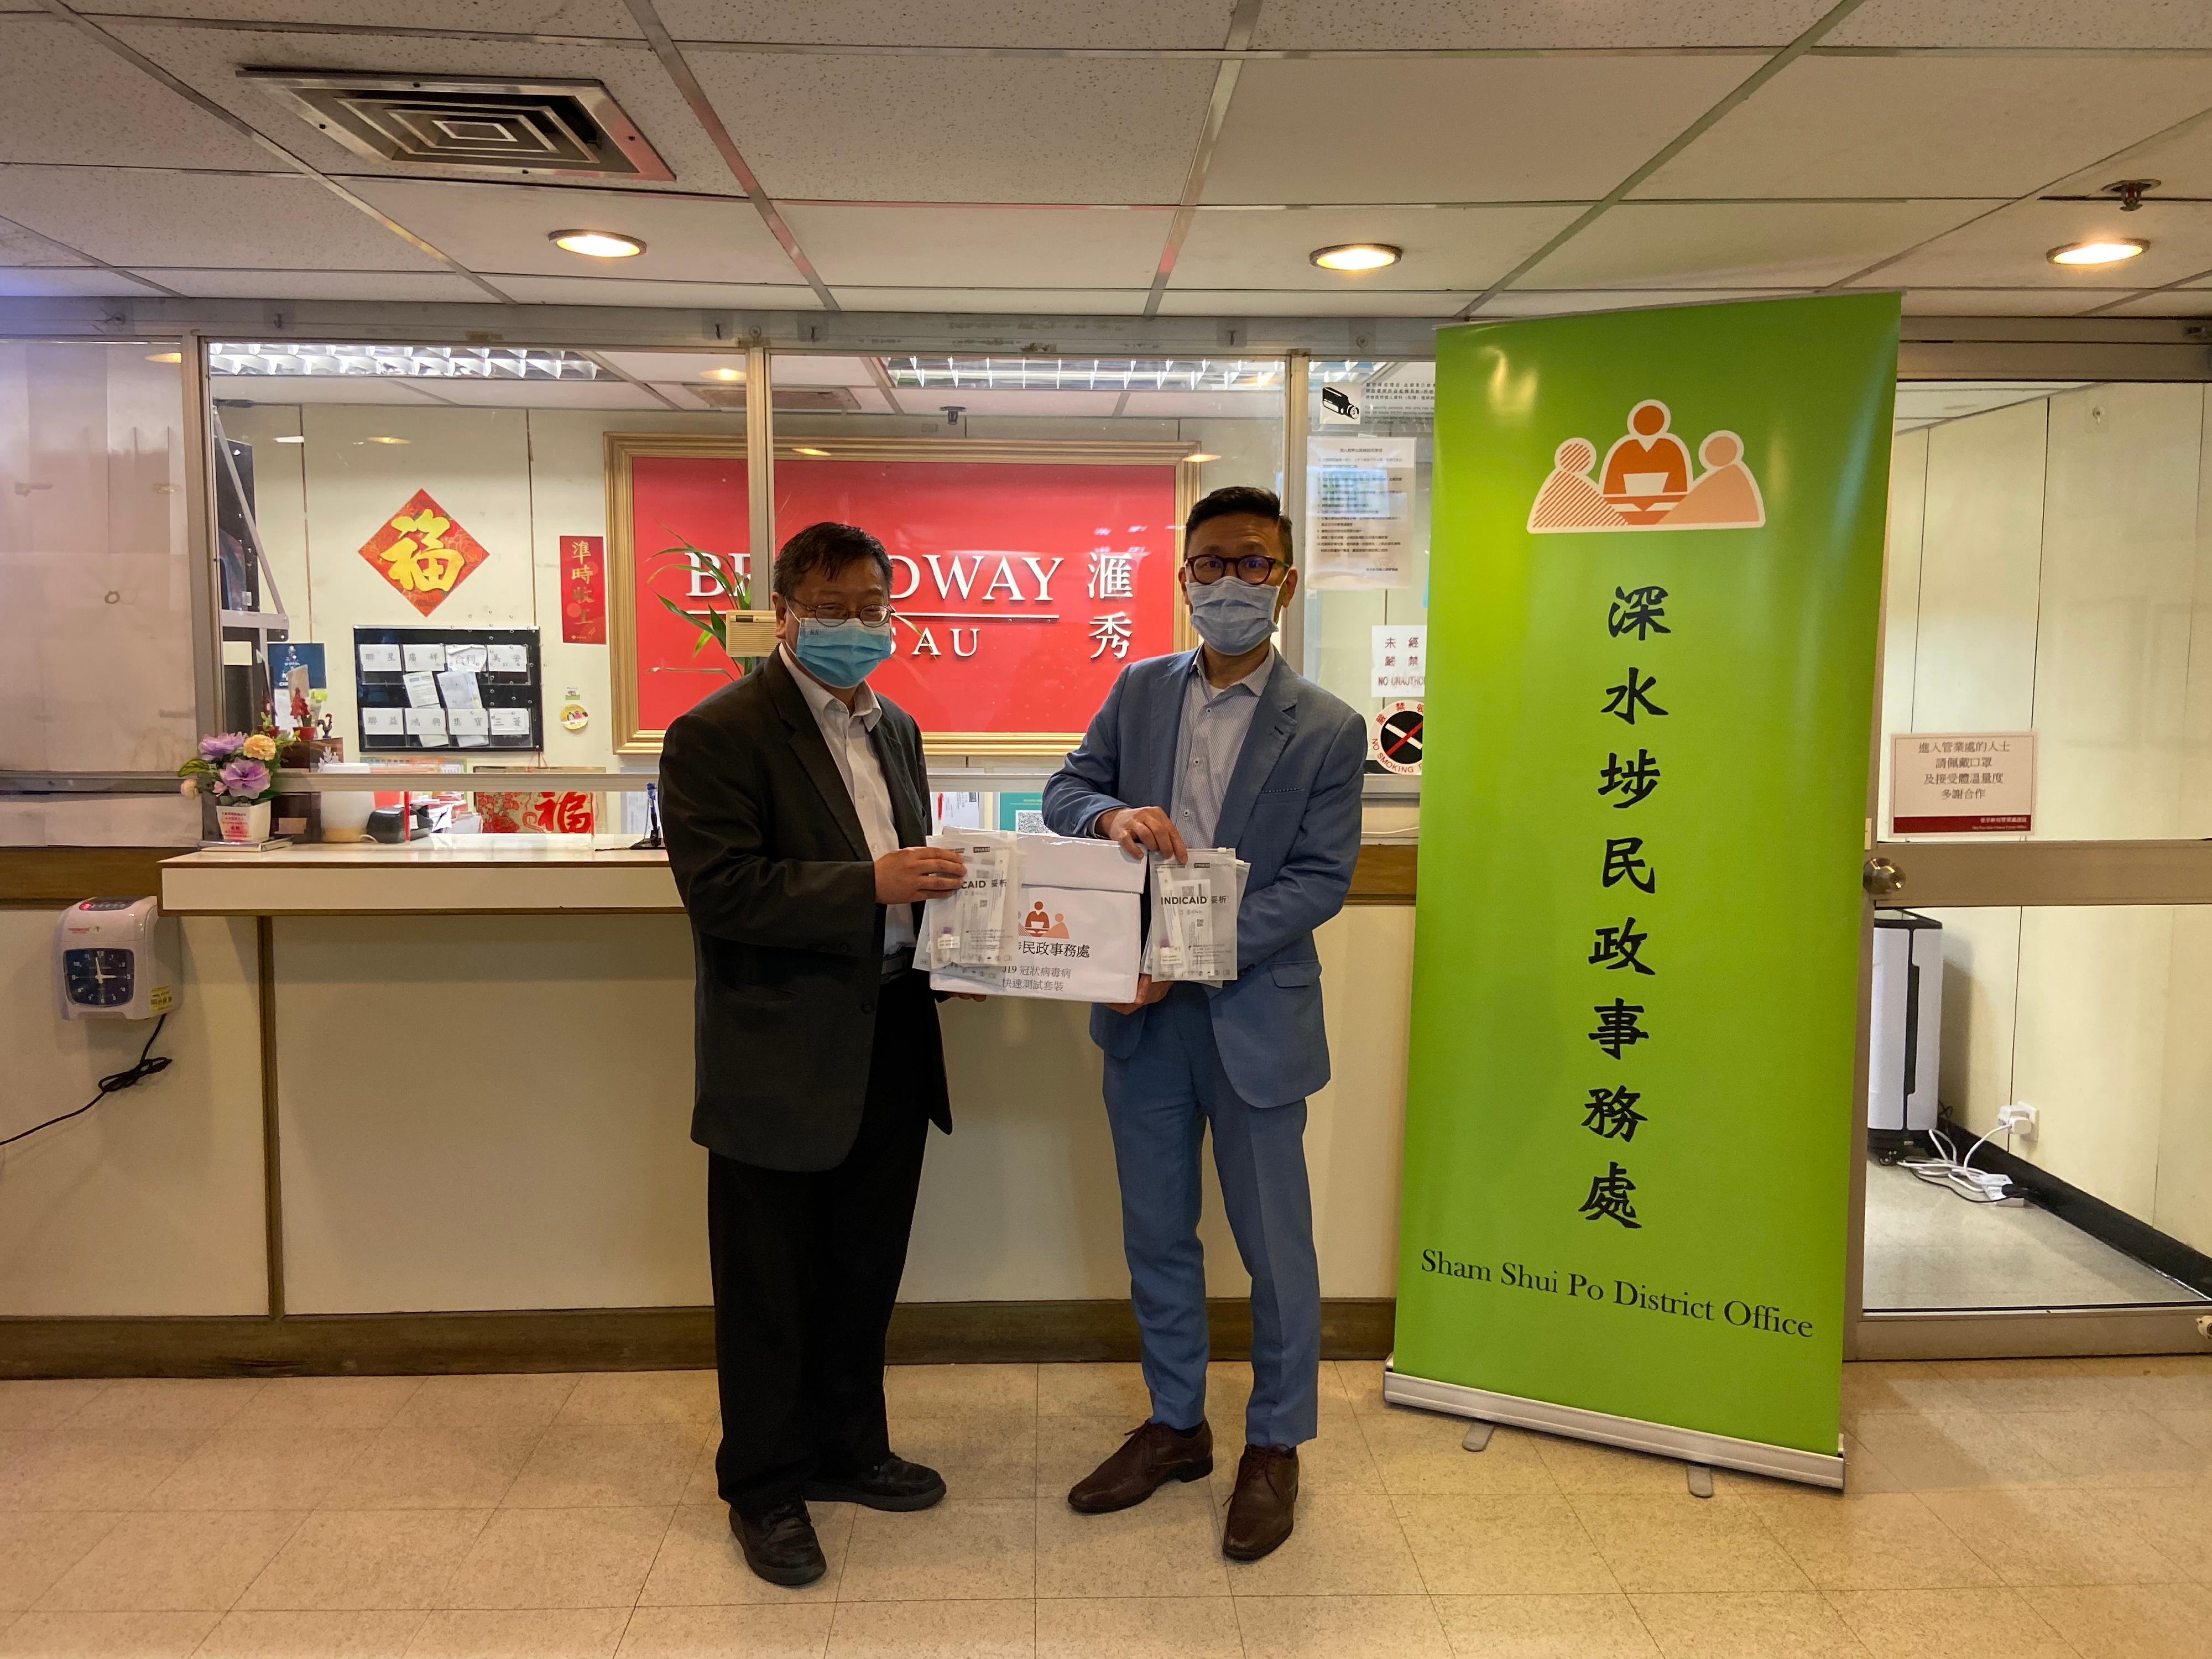 The Sham Shui Po District Office today (April 26) distributed COVID-19 rapid test kits to households, cleansing workers and property management staff living and working in Phase 1, 2 and 7 of Mei Foo Sun Chuen for voluntary testing through the property management company.